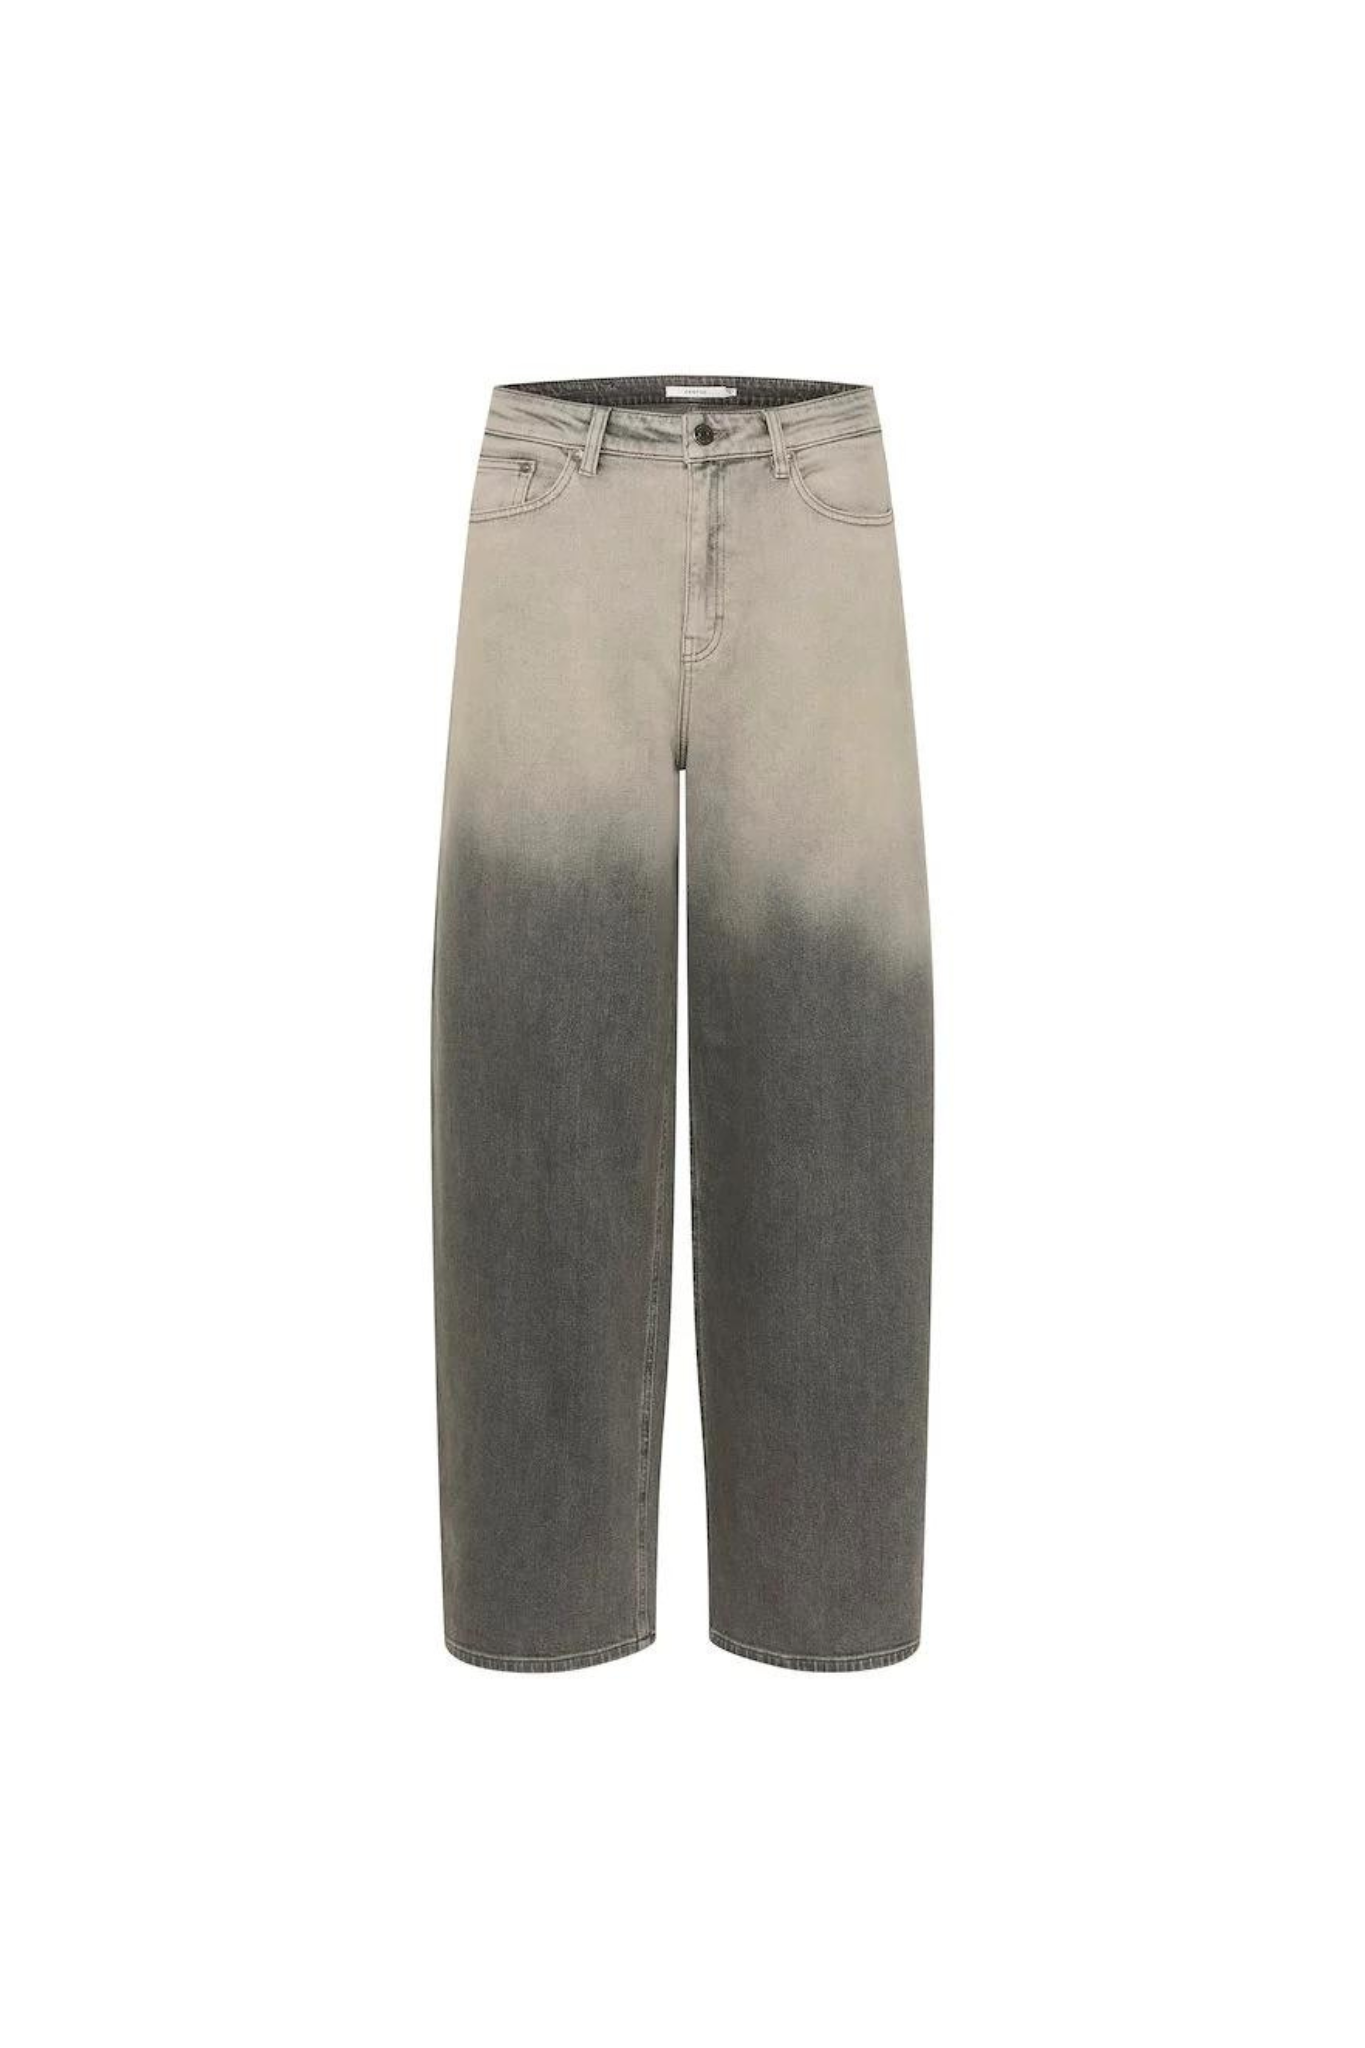 ZORELLY HW WIDE PANTS - GREY FAIDED WASH